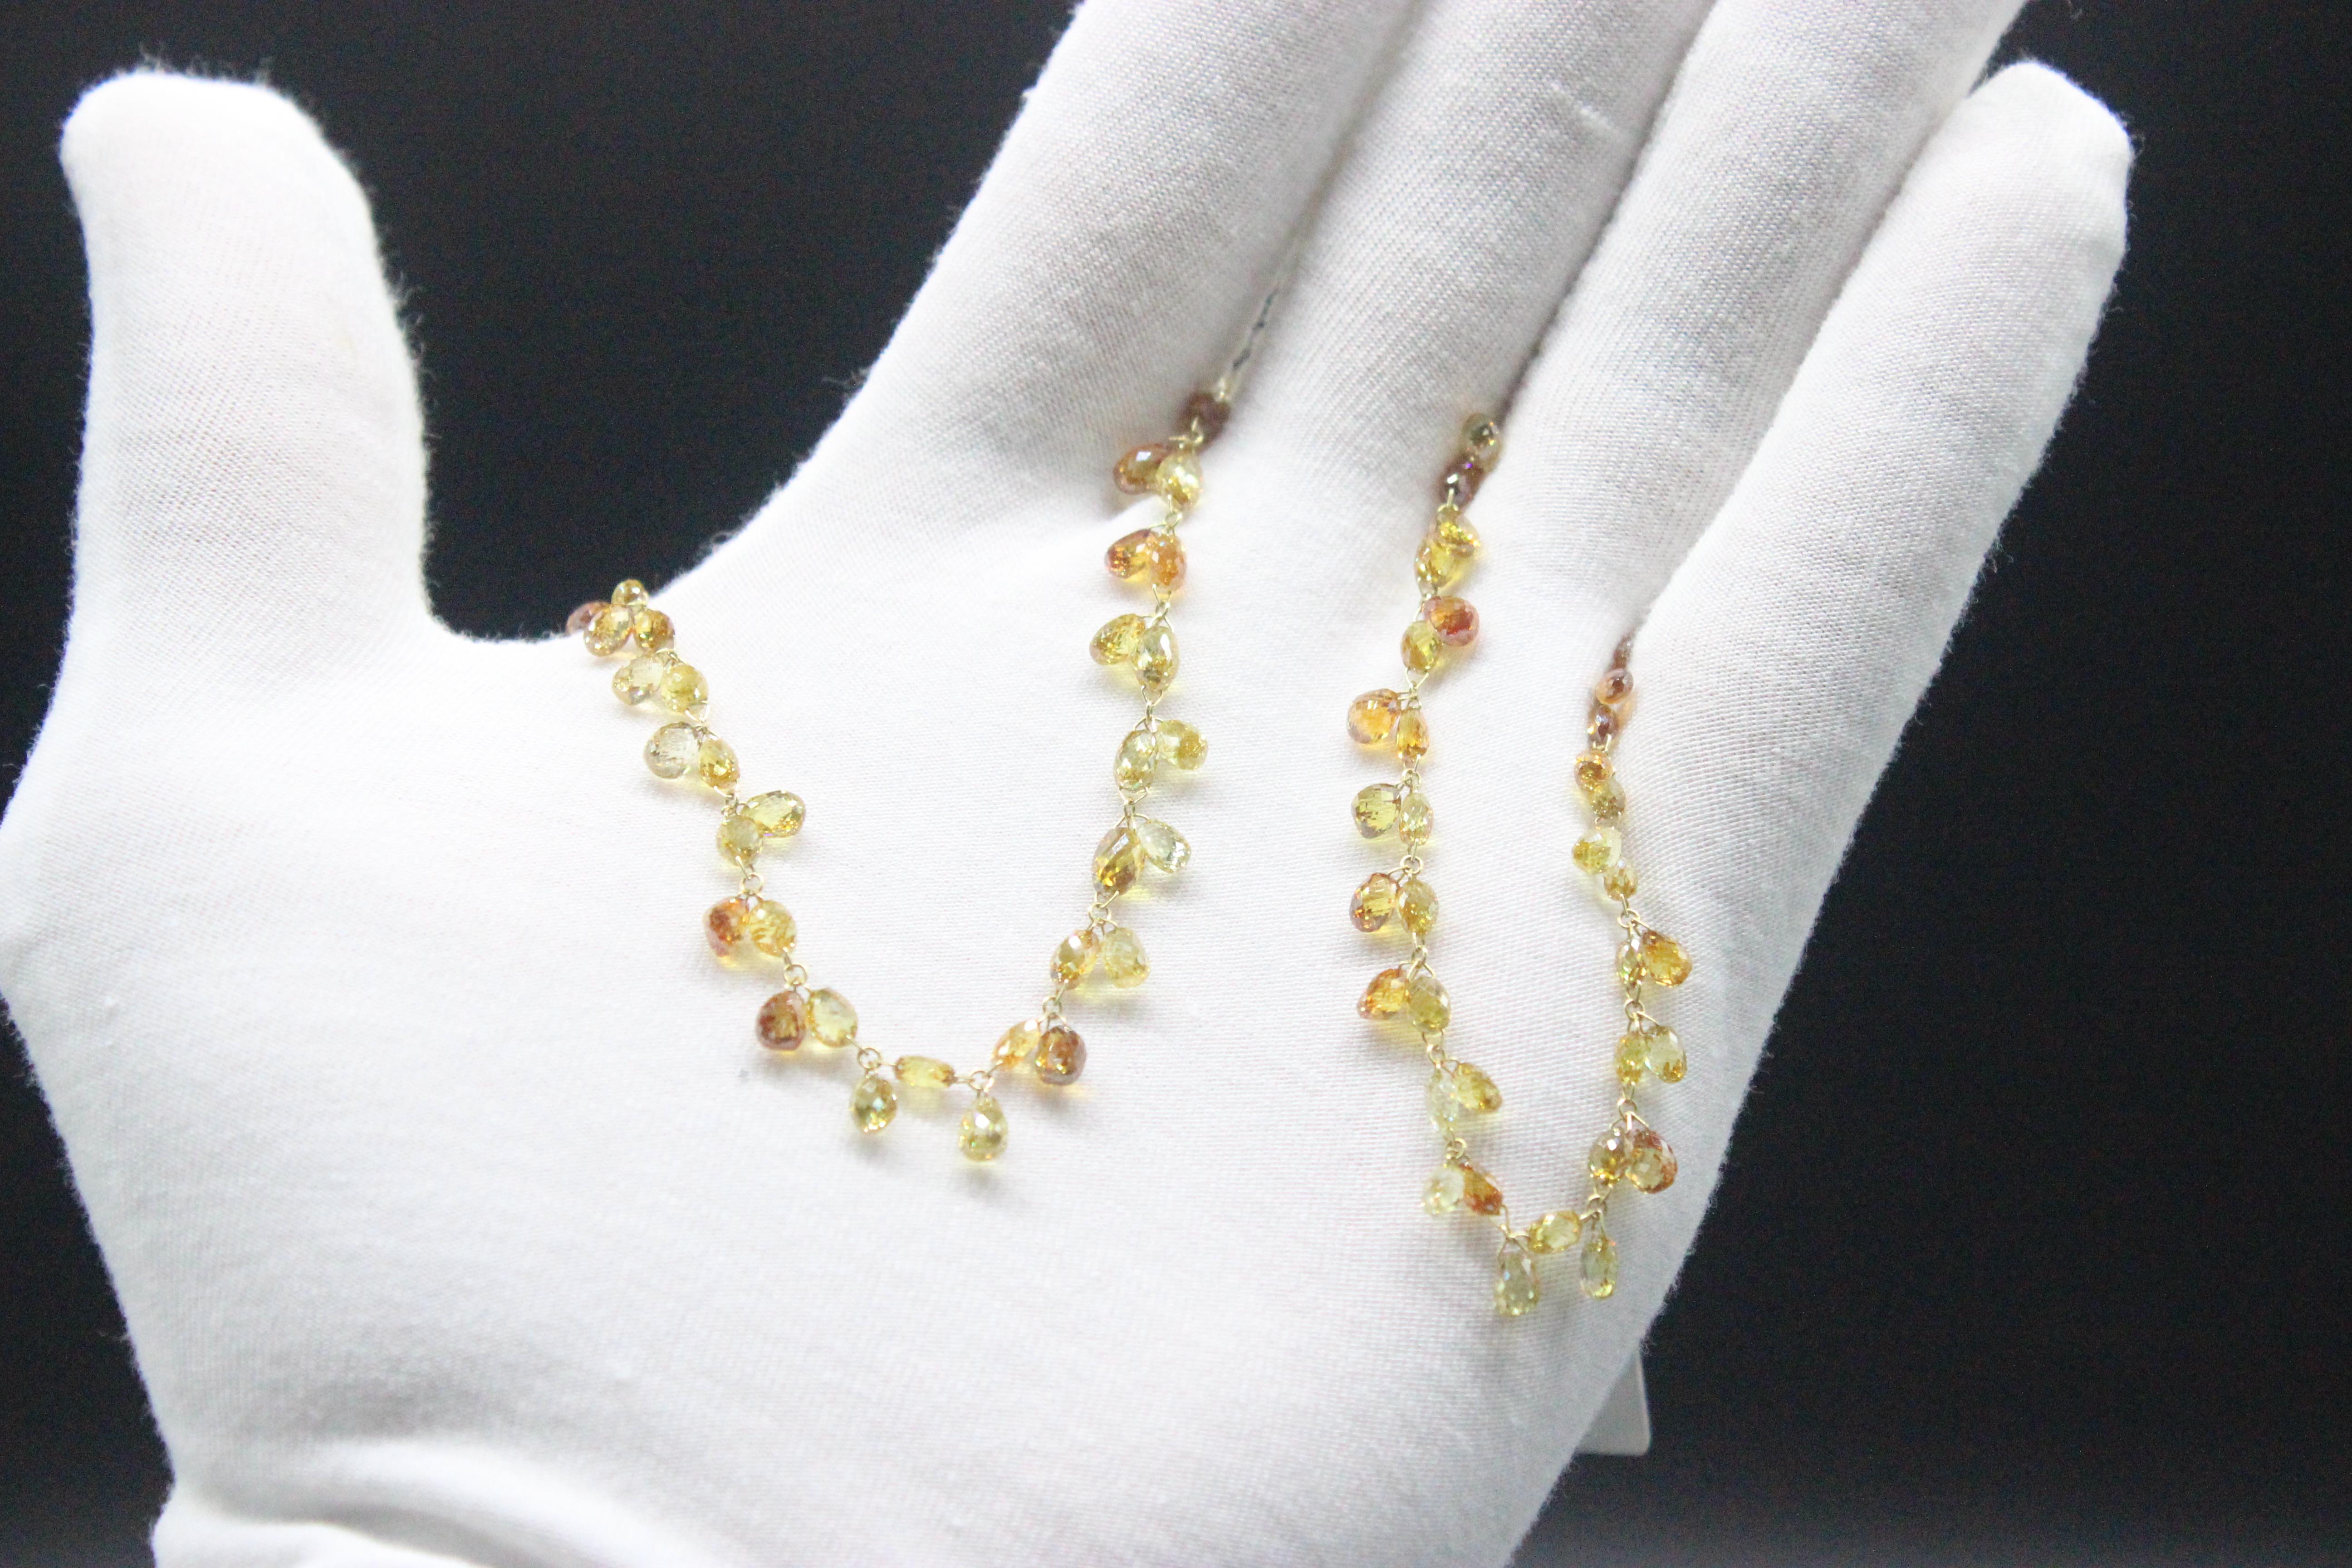 PANIM  34.20 Carat Natural Fancy Color Diamond Floral Choker Link Necklace

A mixture of natural golden yellow to orangy yellow to canary yellow specially hand cut by our master craftsmen, the Floral Link Diamond Chain Necklace is the sister to the